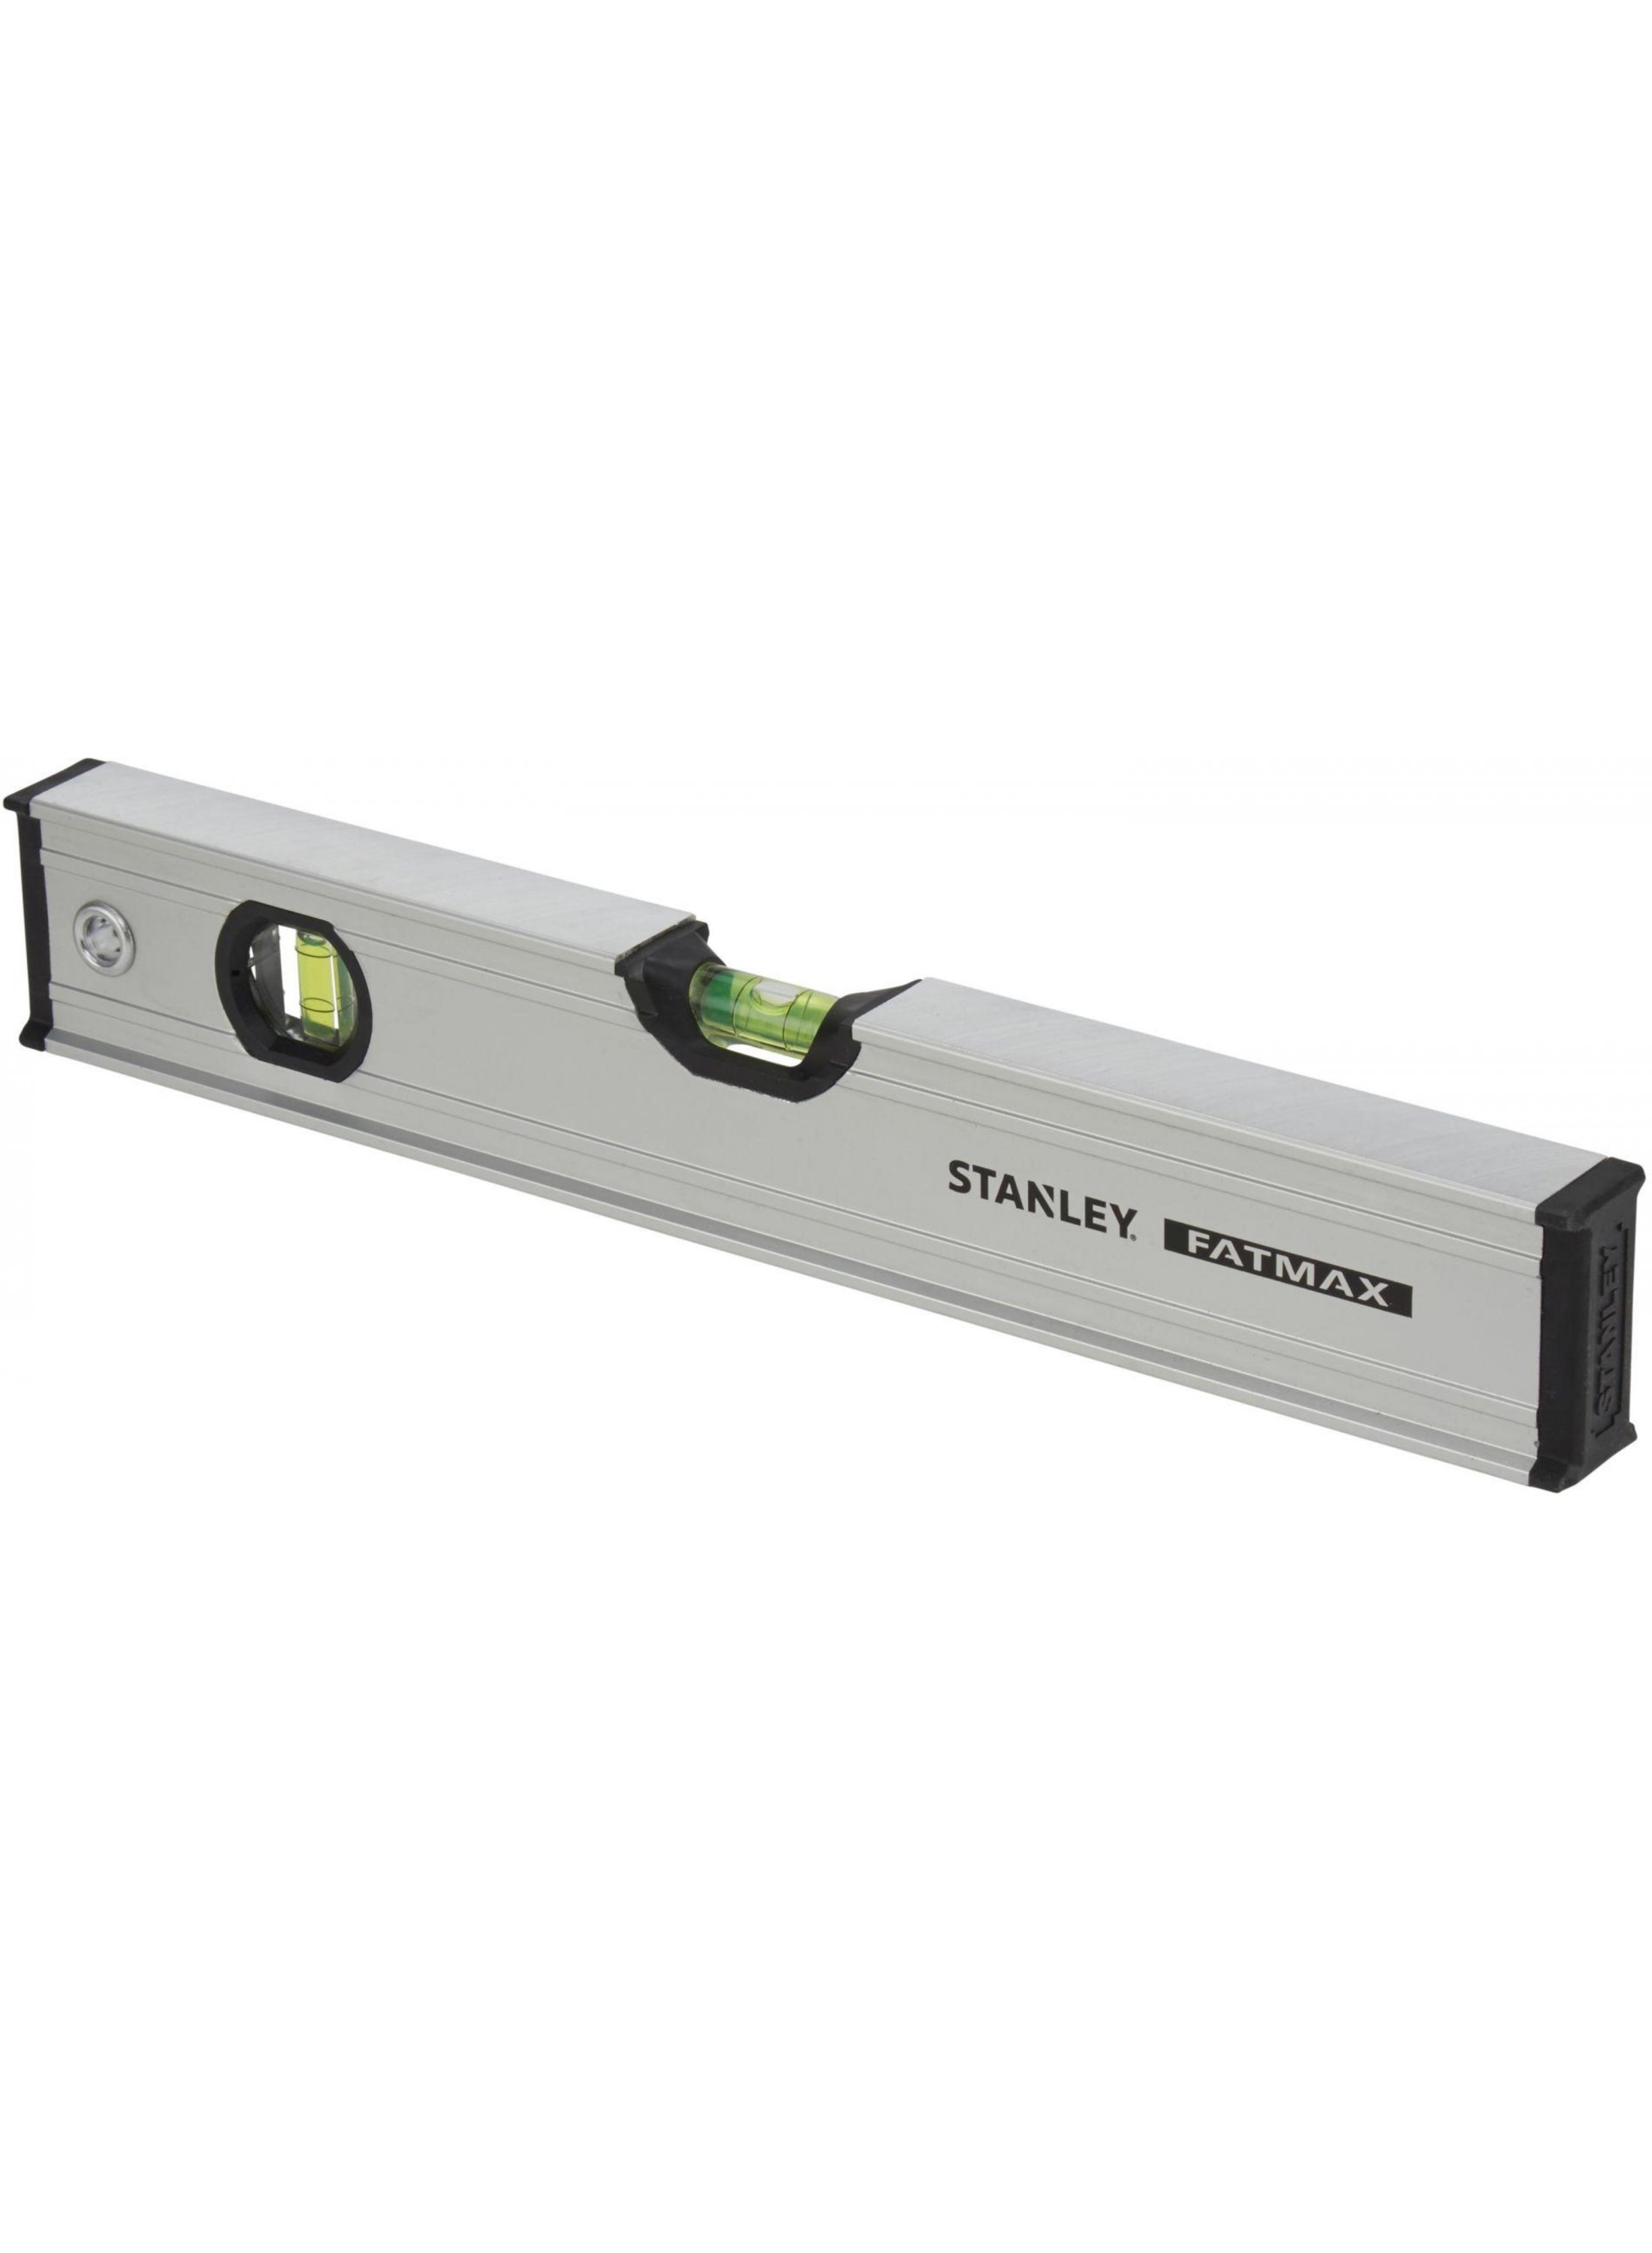 FatMax Extreme Level - Magnetic 40cm Stanley